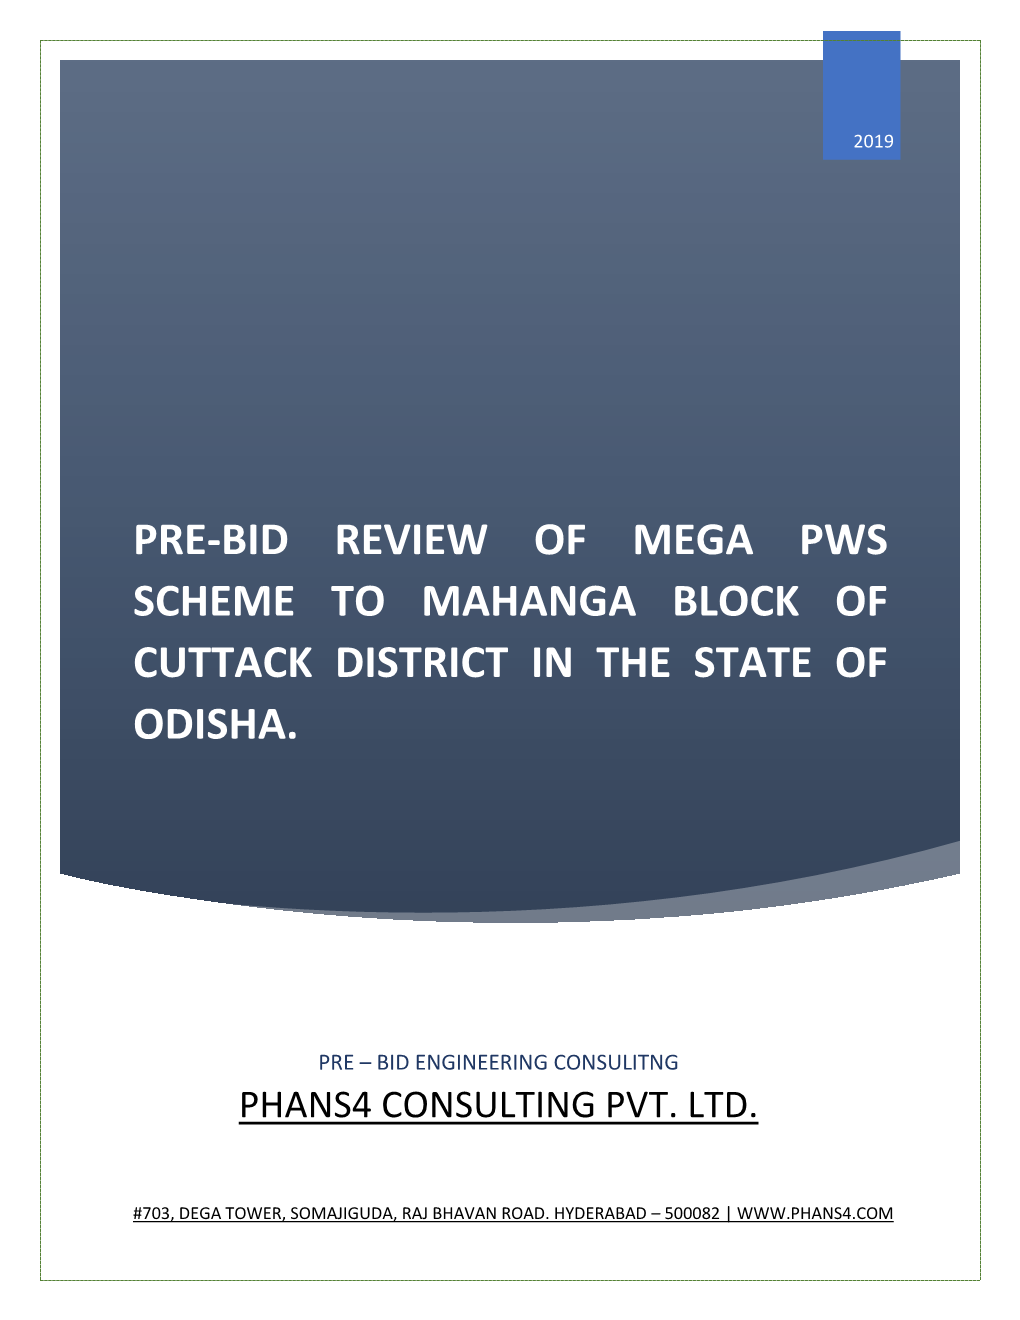 Pre-Bid Review of Mega Pws Scheme to Mahanga Block of Cuttack District in the State of Odisha